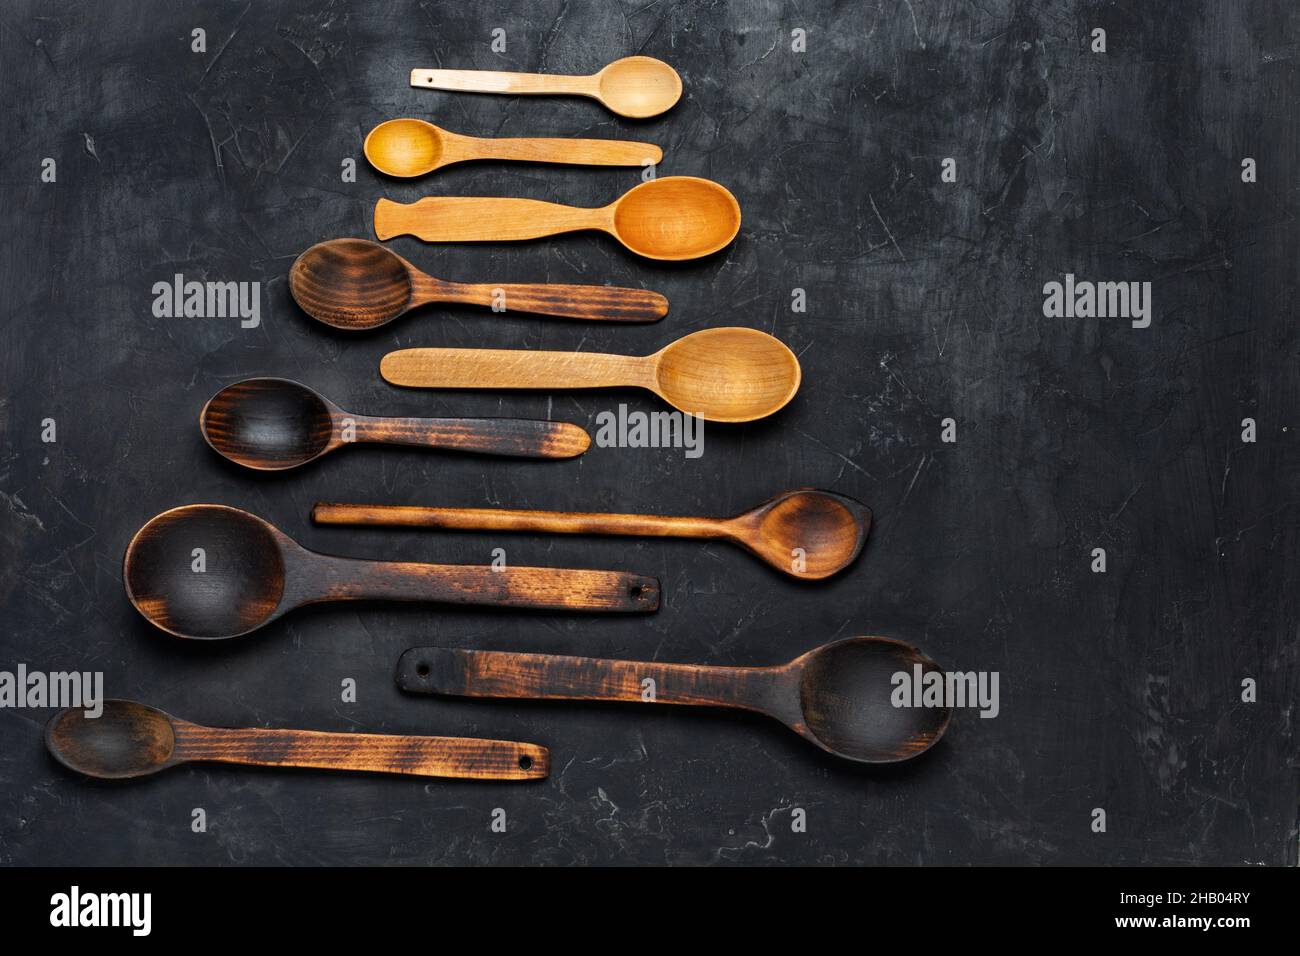 Wooden spoons on dark wooden background. Top view, copy space. Stock Photo